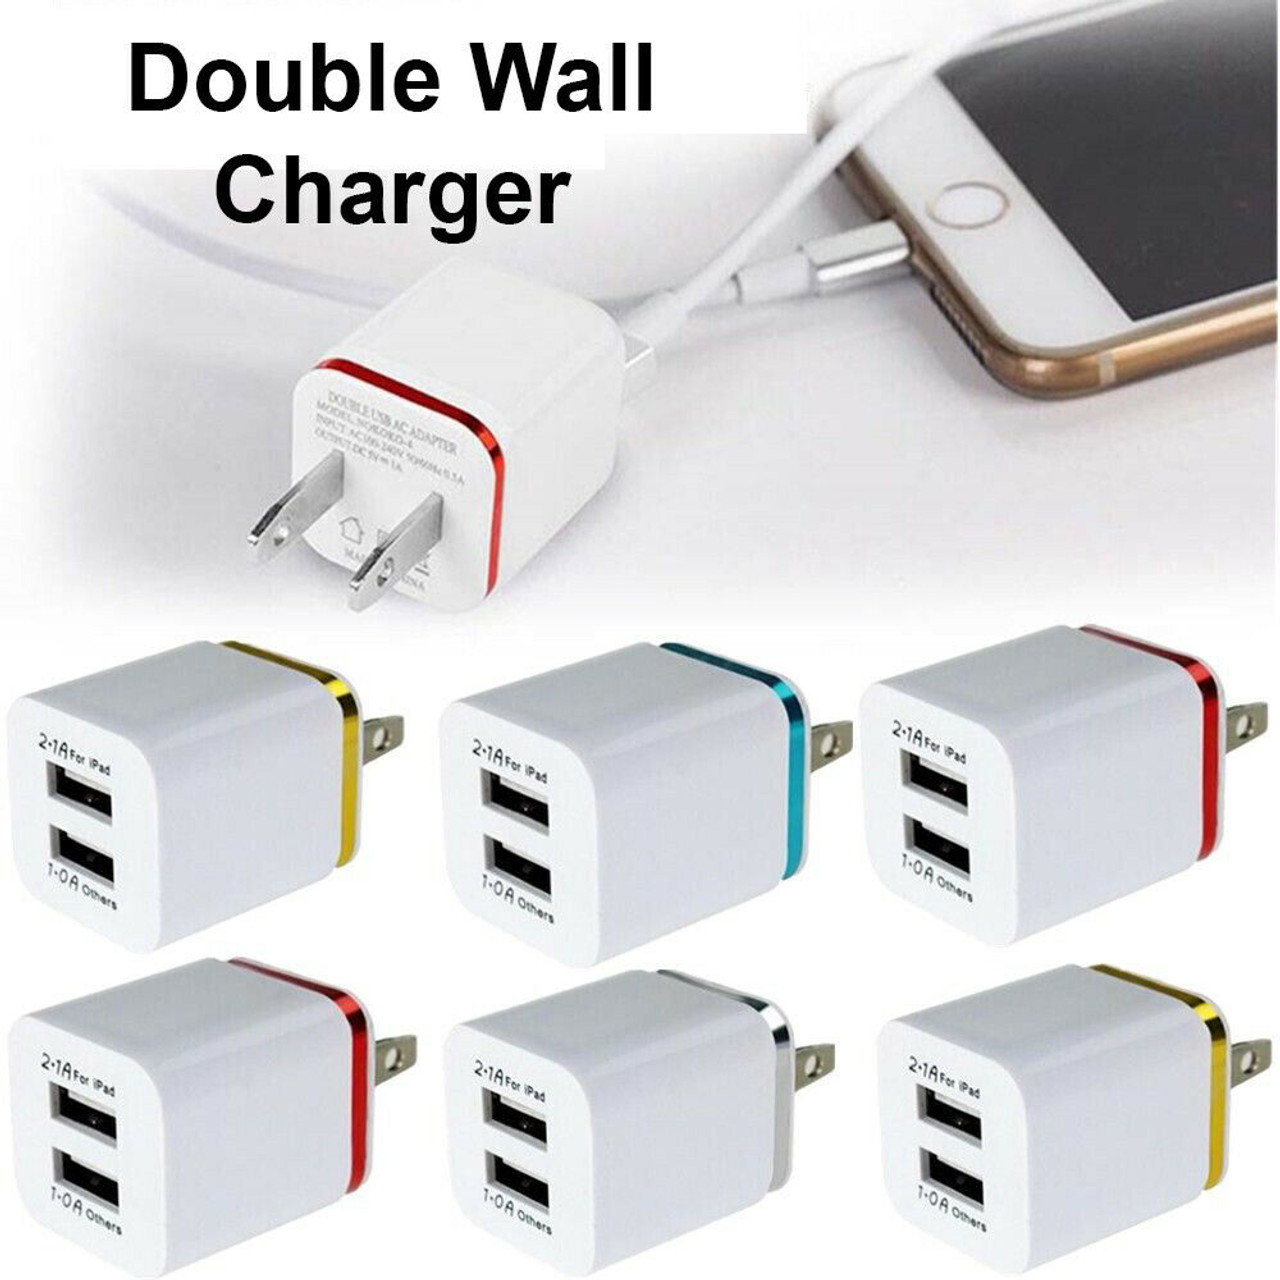 USB Double Wall Fast Charger Adapter 1A 2A 5V For iPhone 6 7 8 11 12 Plus X XR